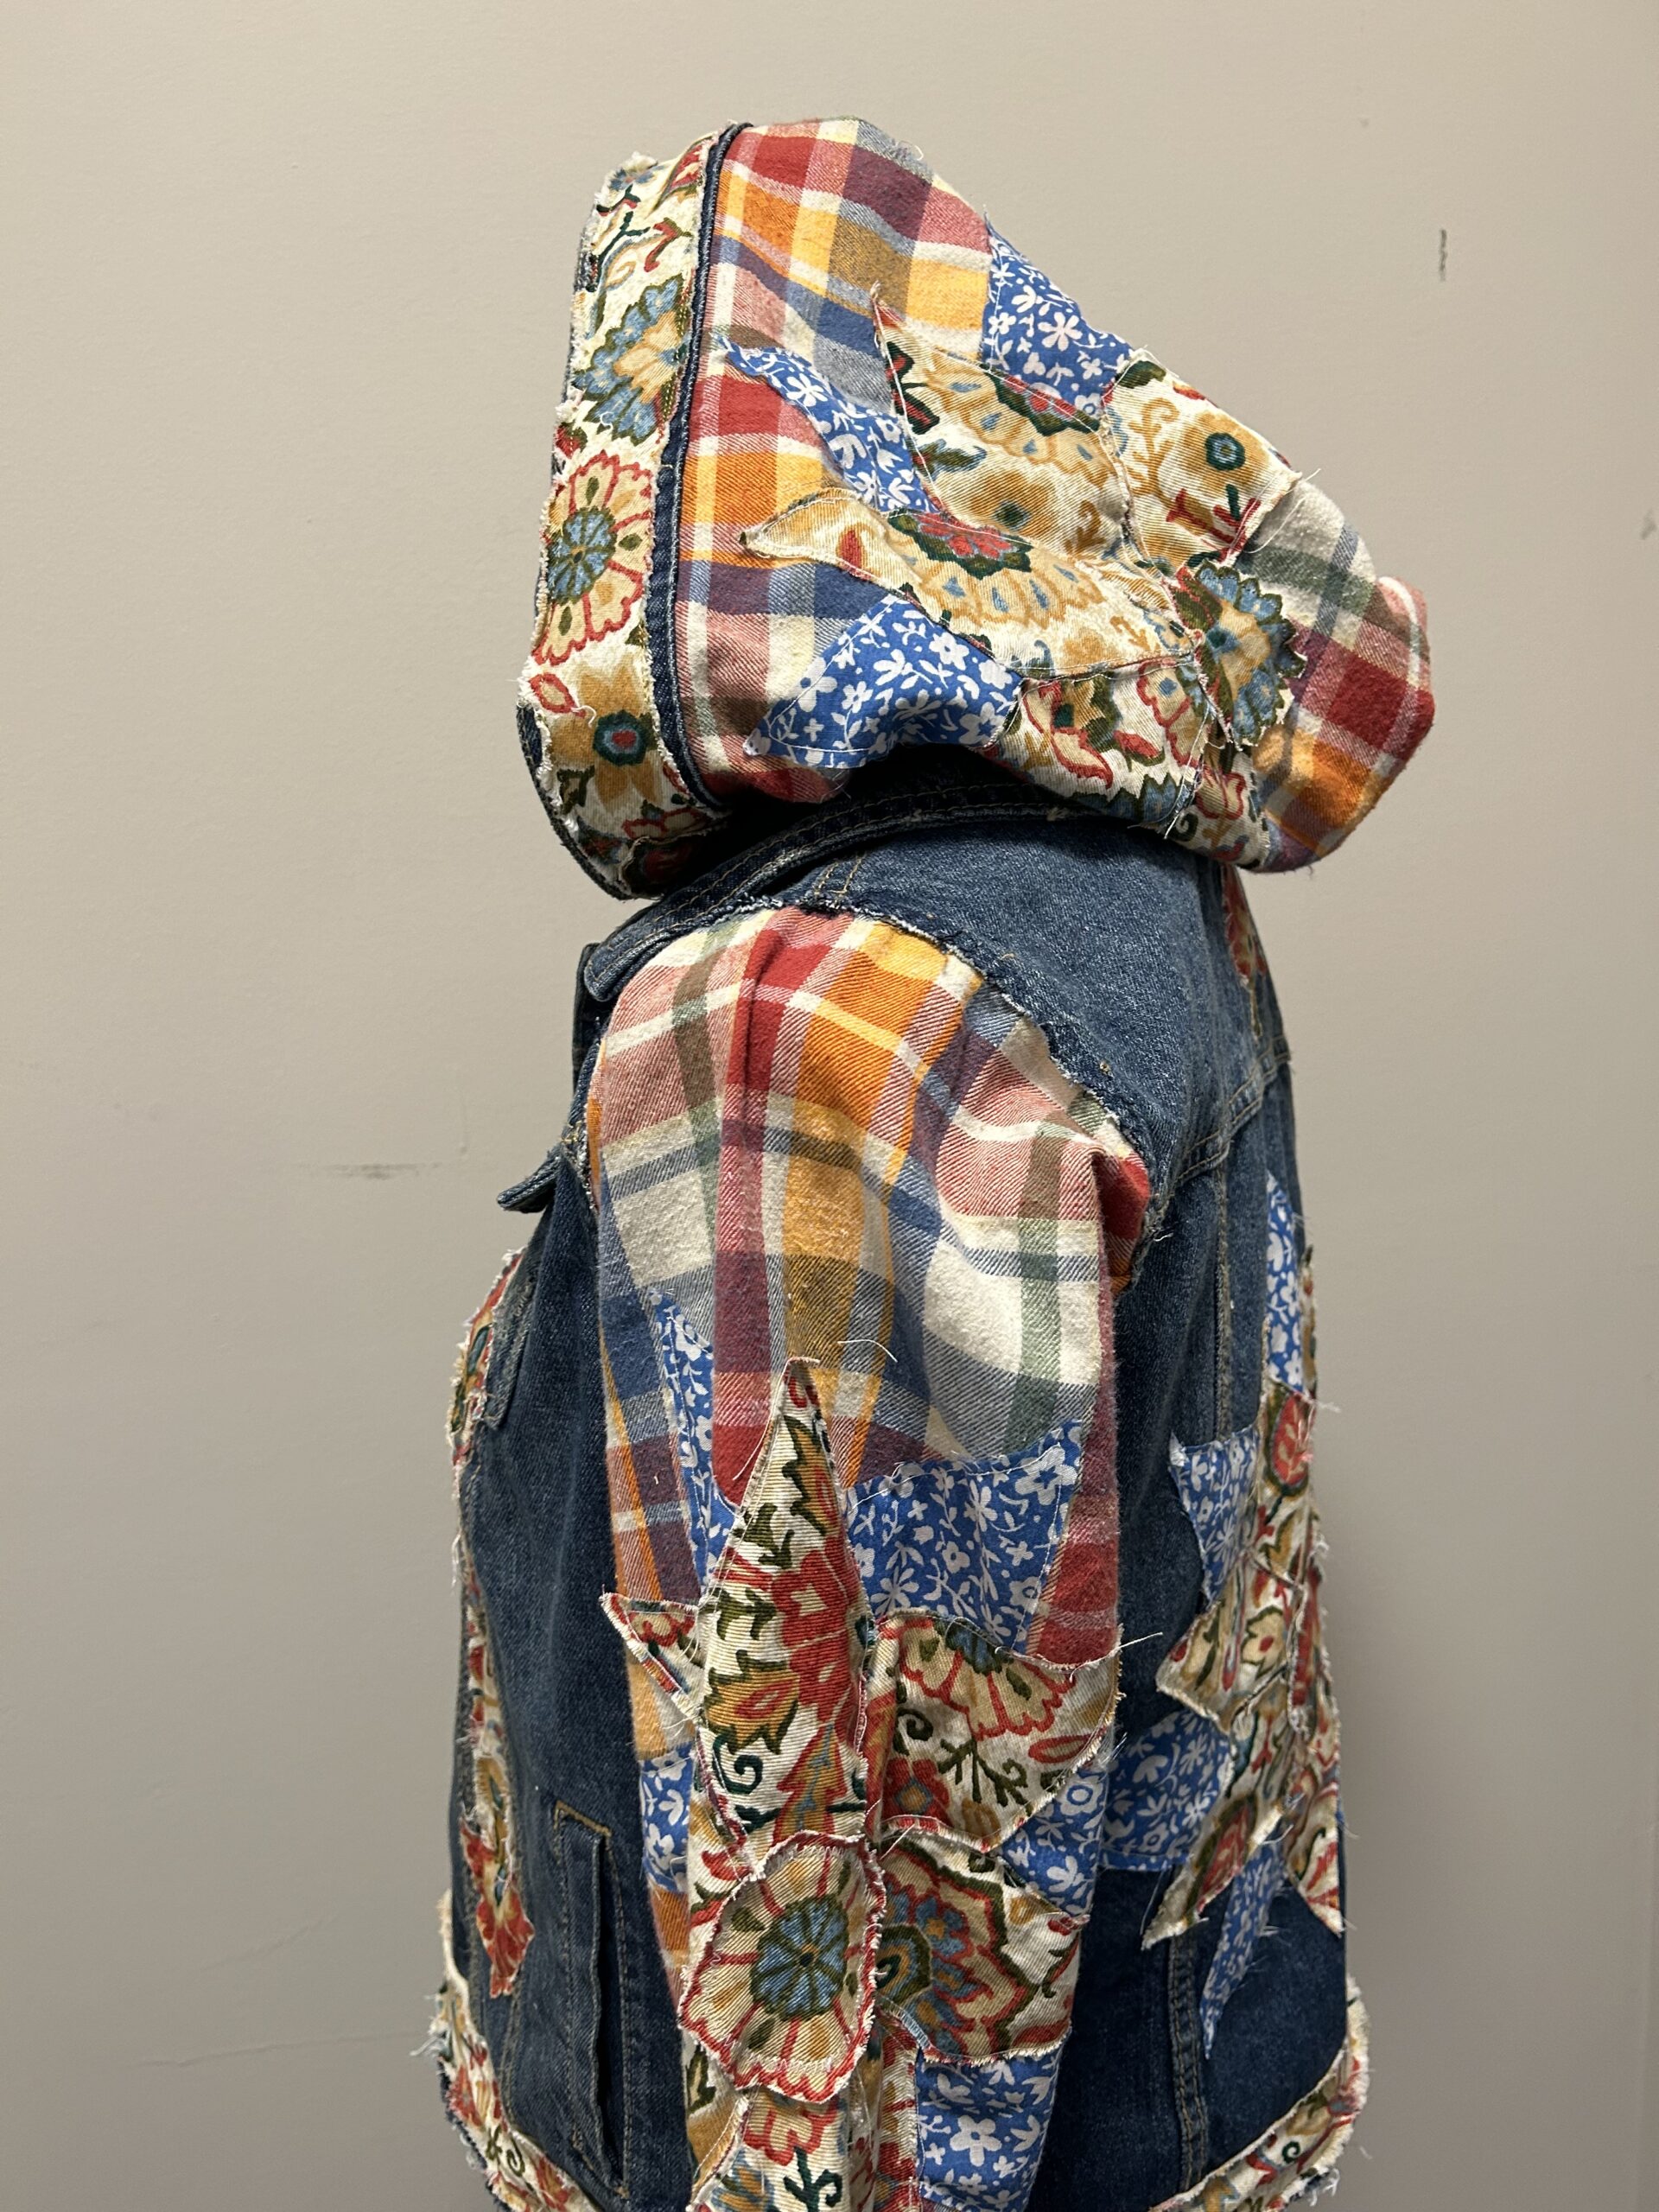 A hooded denim jacket with a floral pattern.